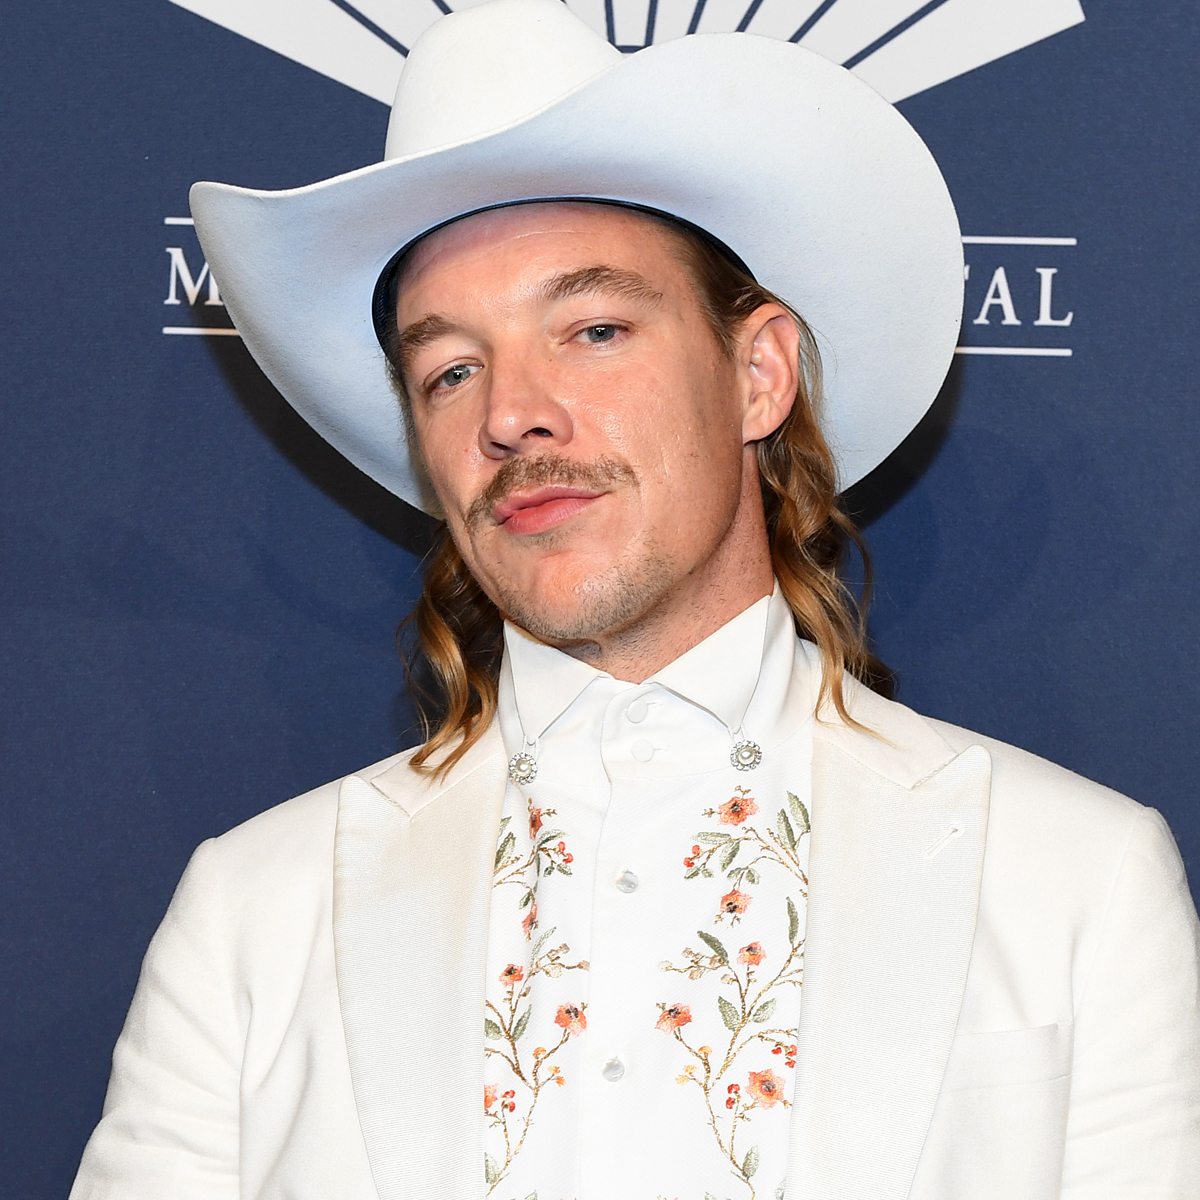 Diplo Slams Woman Who Made "Embarrassing" Sexual Misconduct Claims